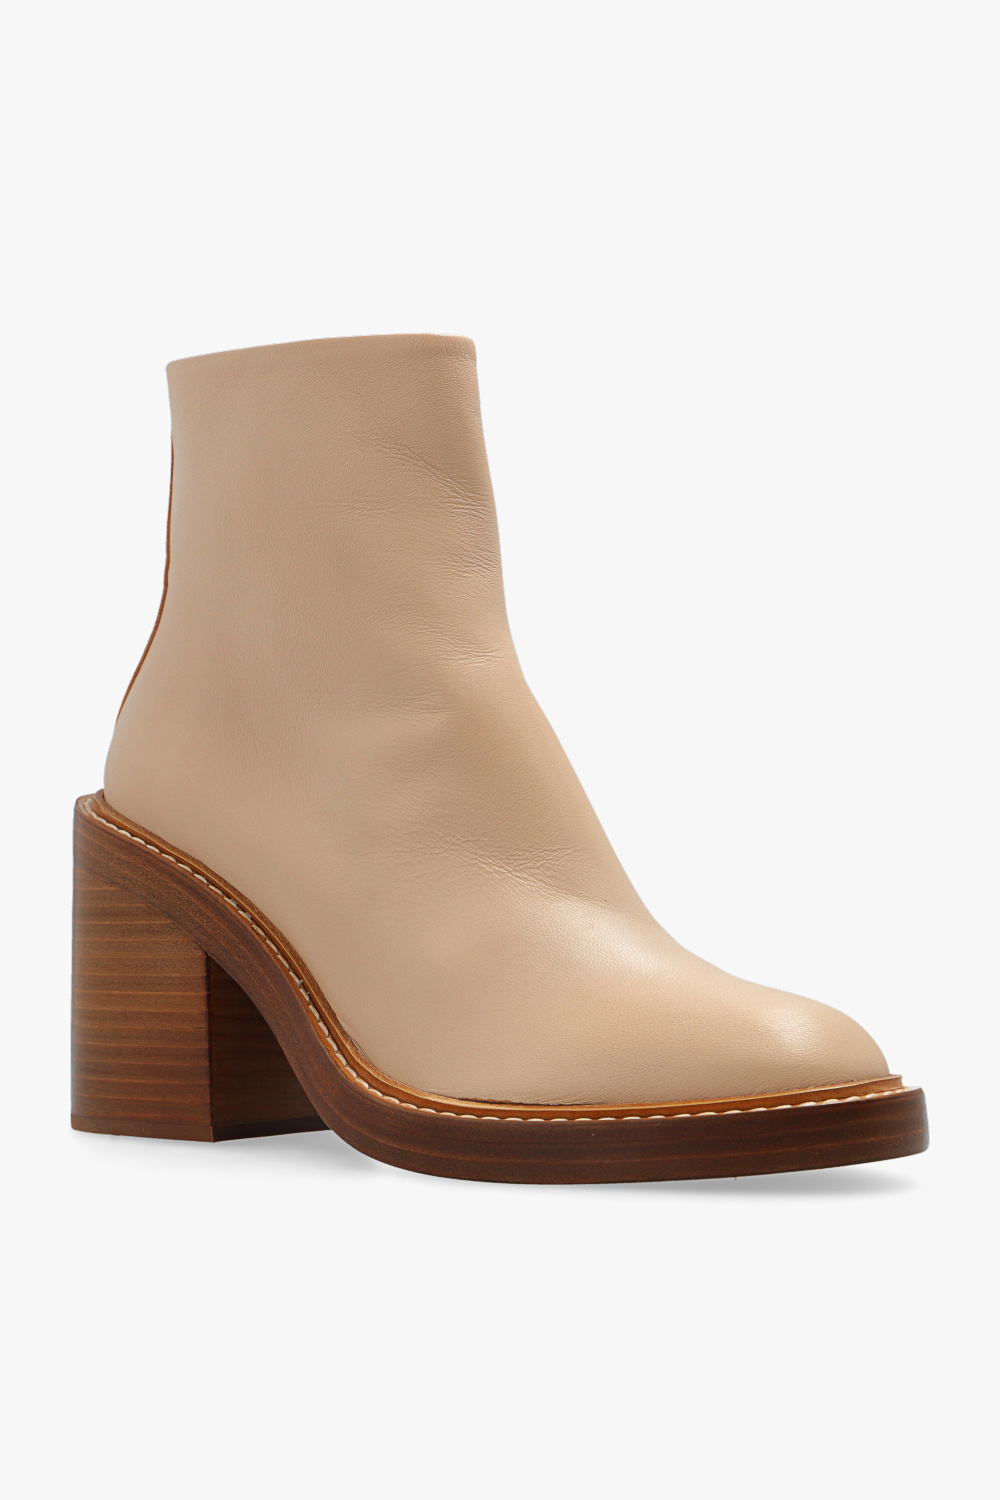 Chloé ‘May’ heeled ankle boots